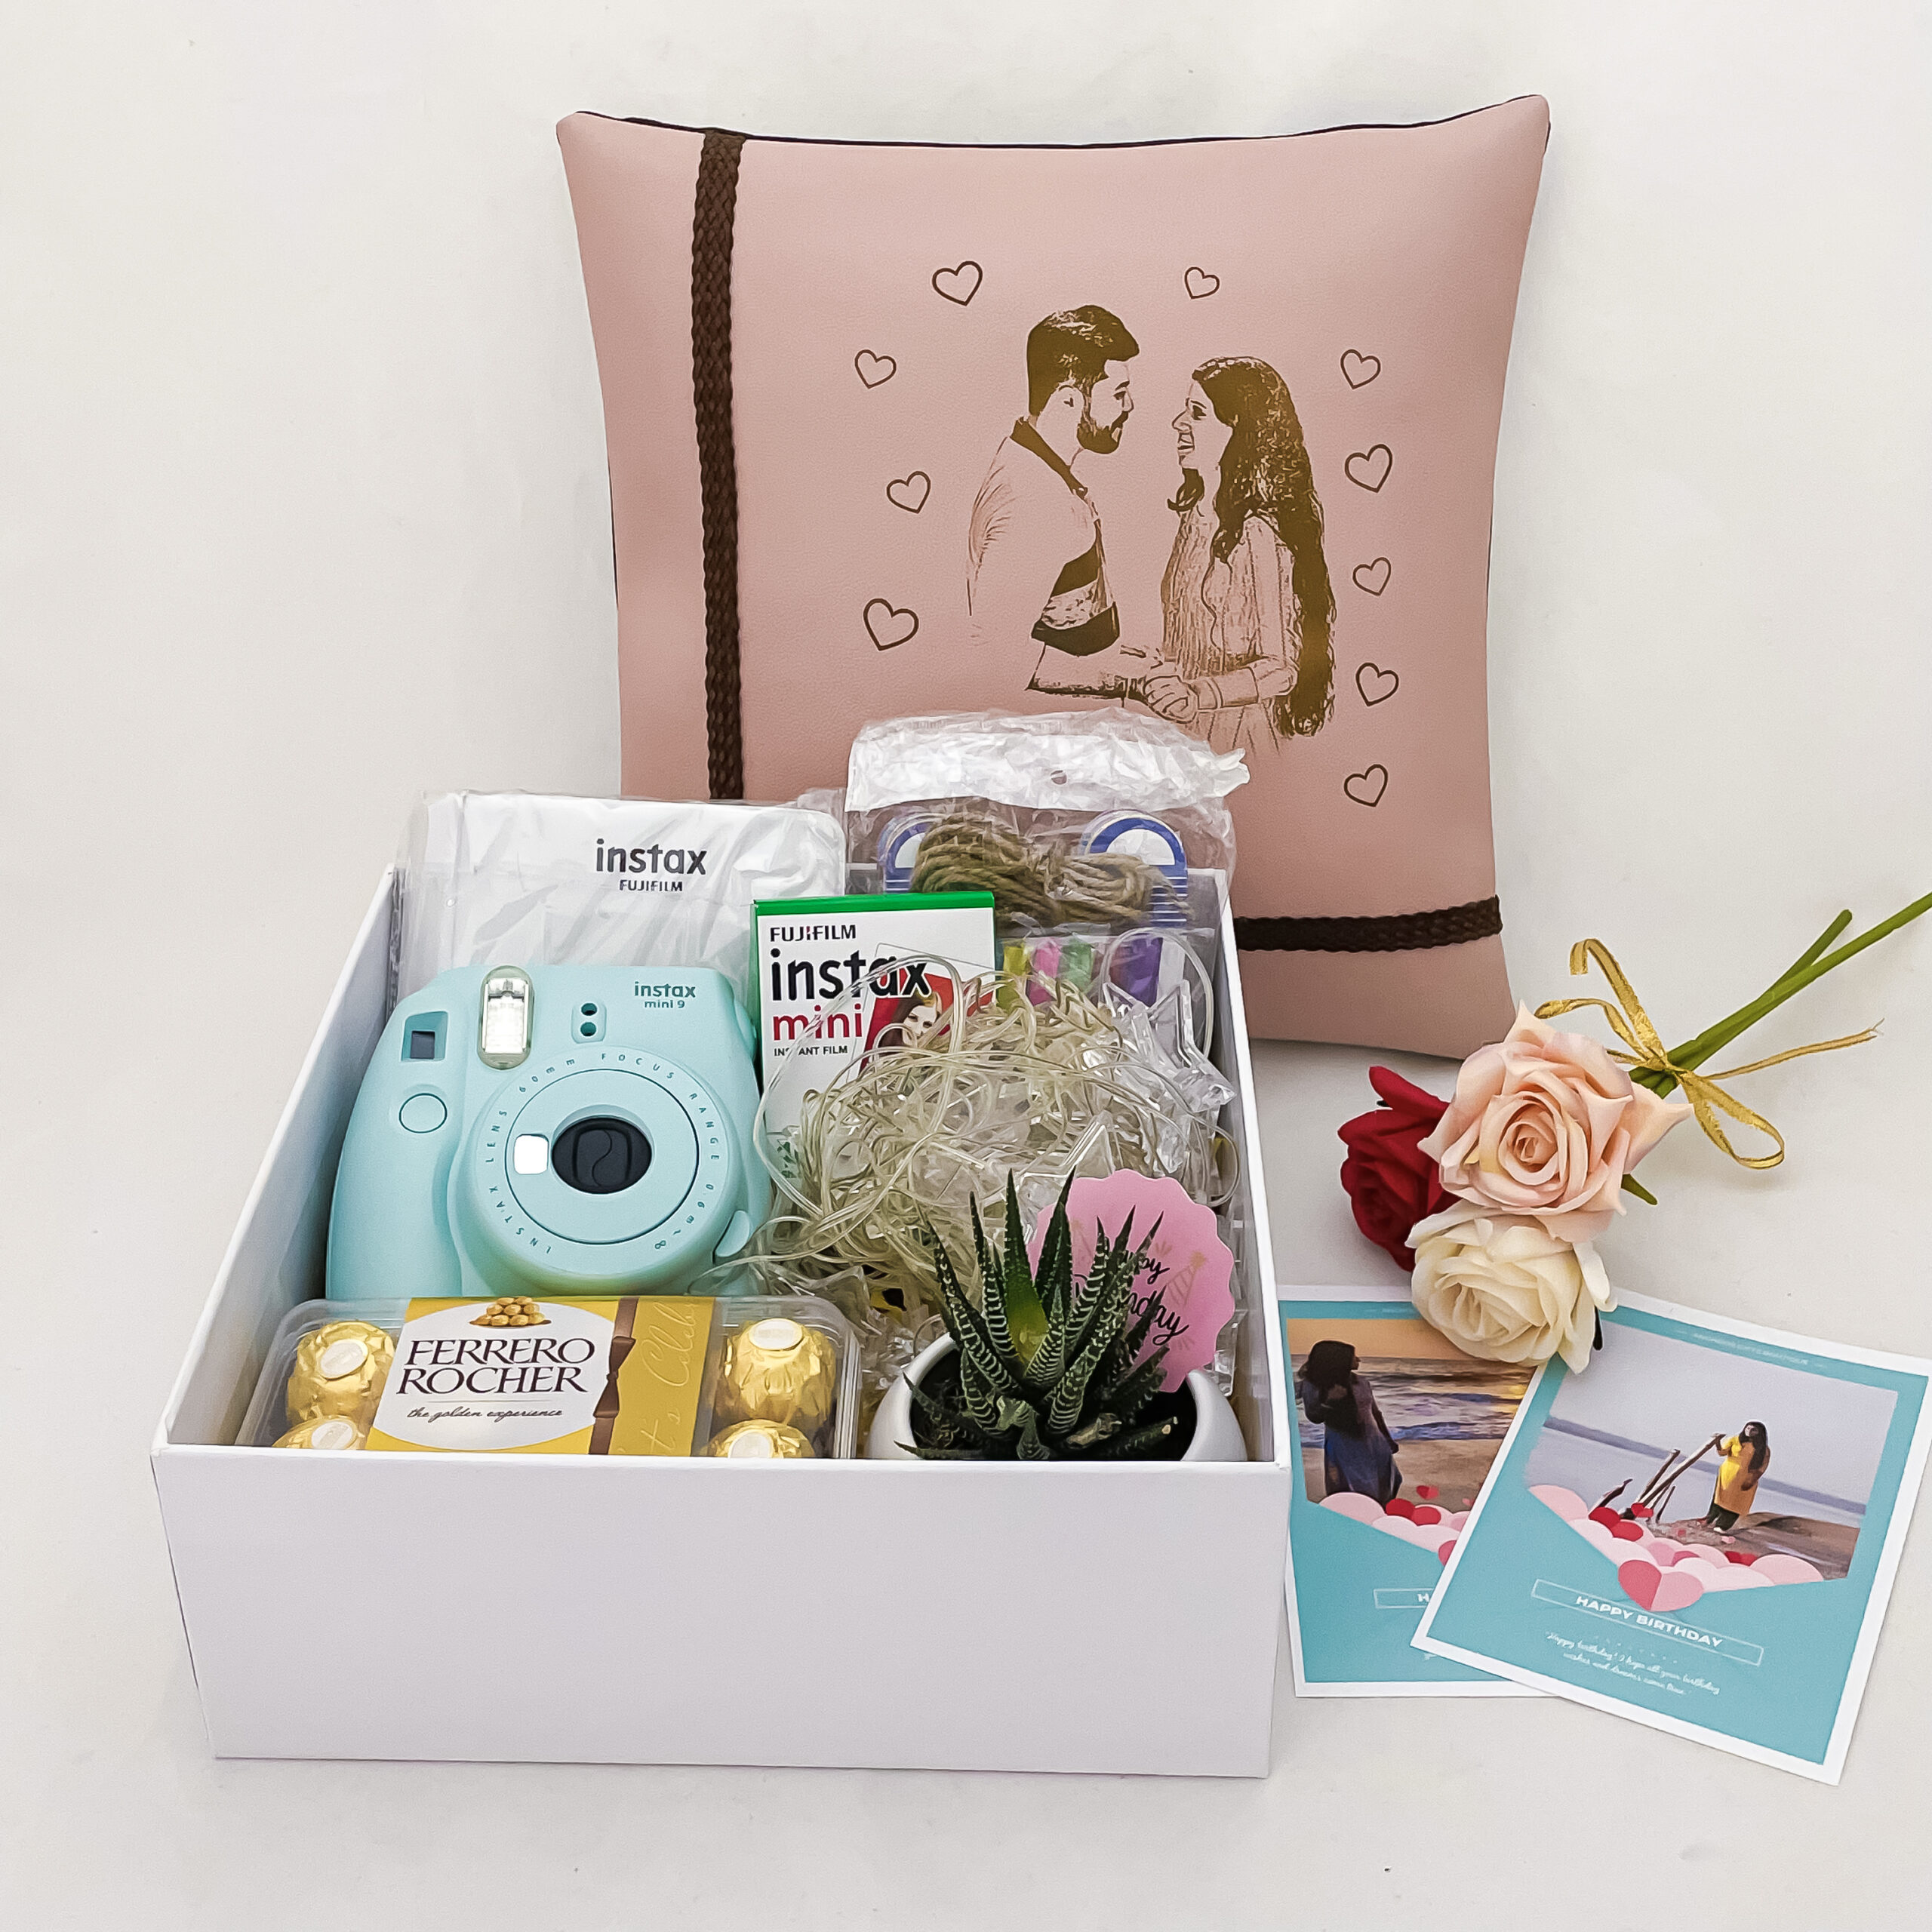 Birthday Gifts for Women, Unique Happy Birthday Relaxing Spa Bath Set Gift  Baskets Ideas for Her,